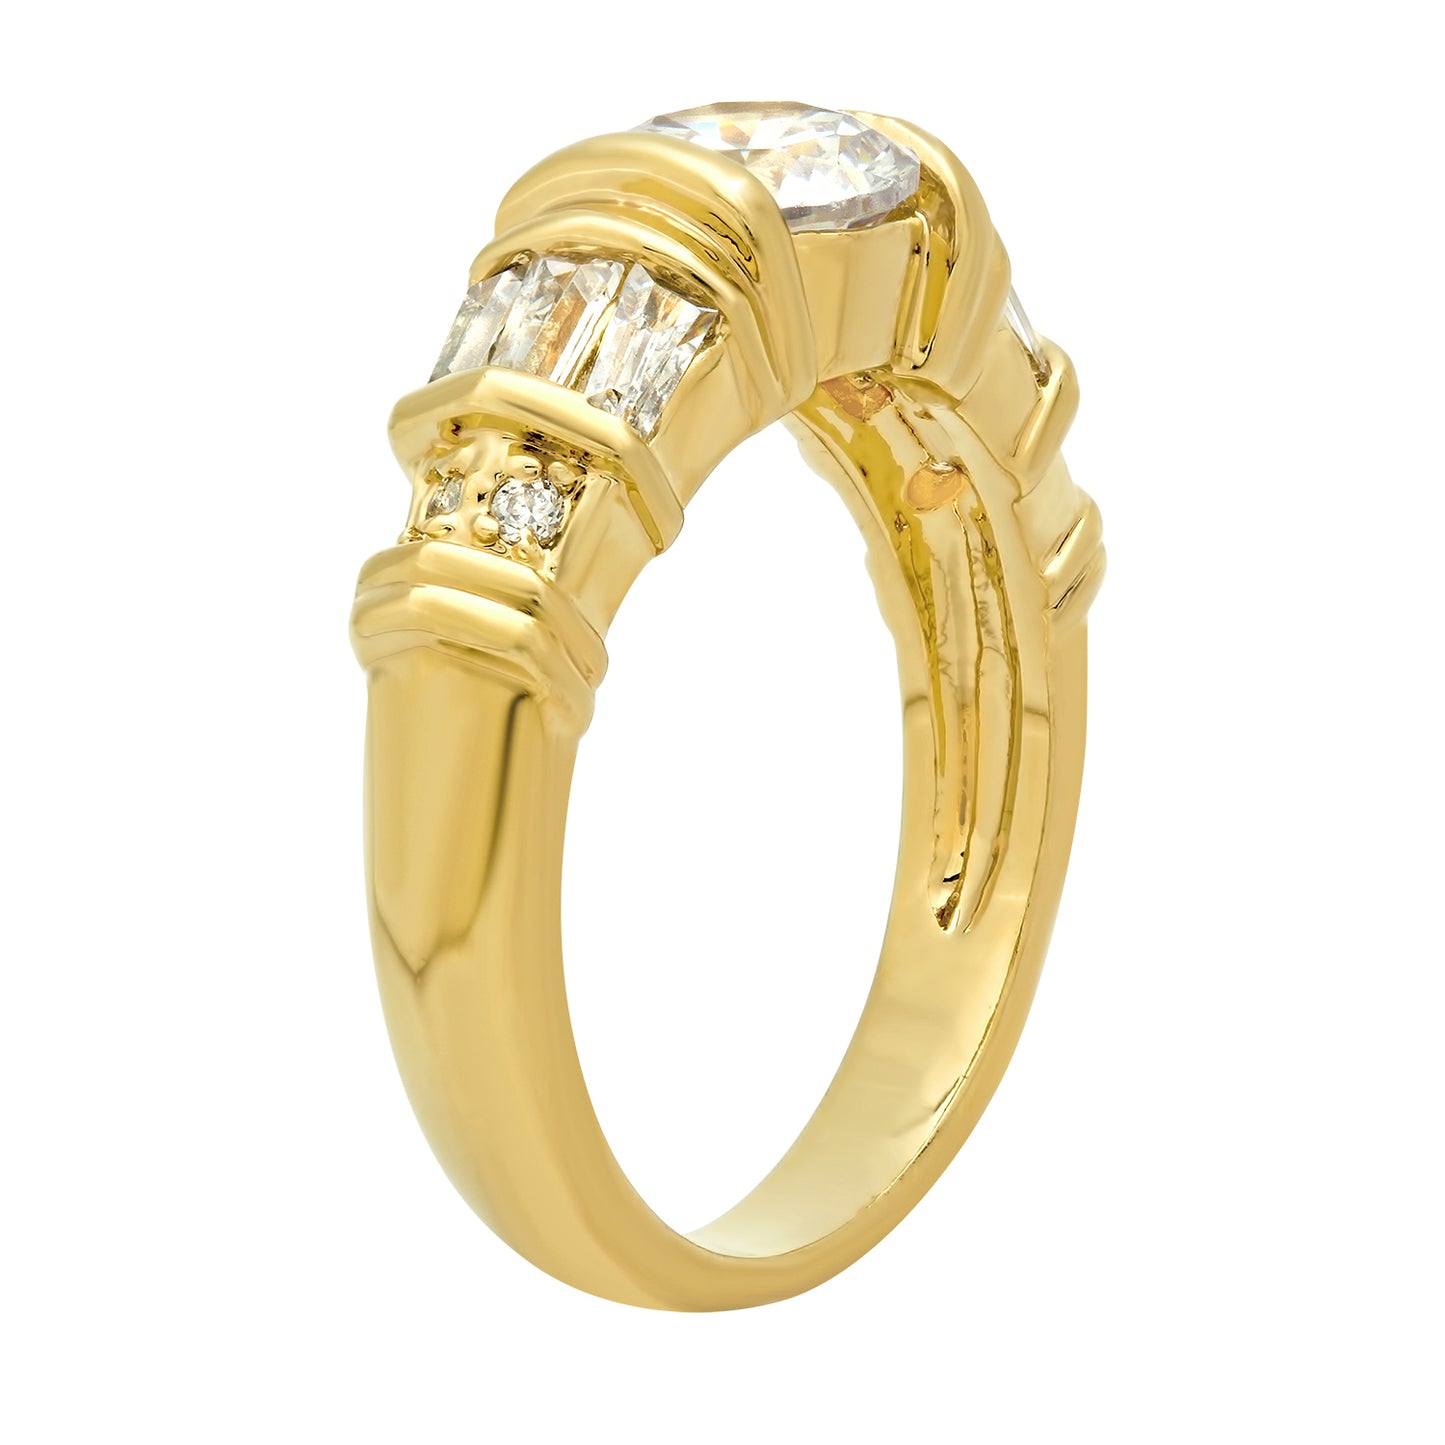 Gold Plated Round CZ Solitaire Ring w/Baguette/Round CZ Accents + Jewelry Polishing Cloth (SKU: GL-LR134)